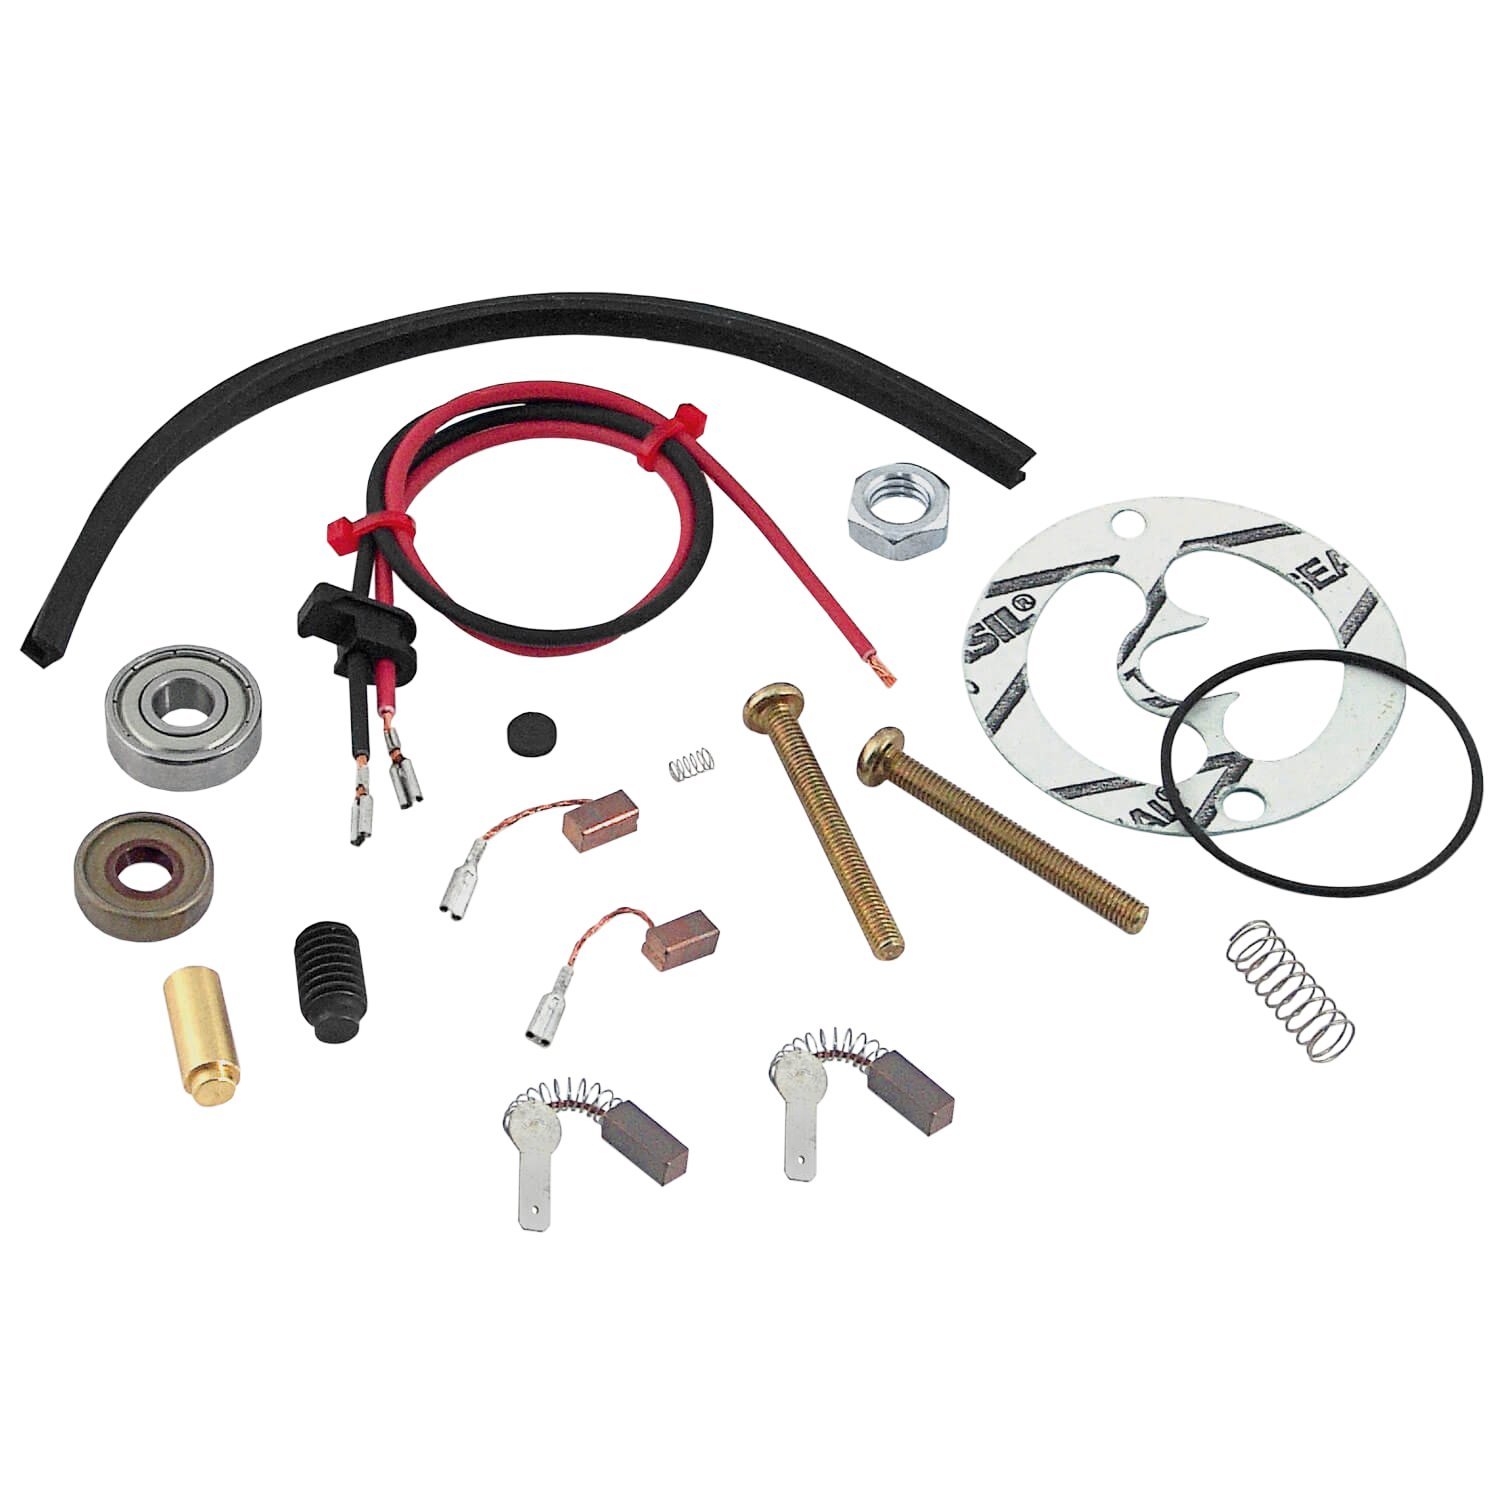 Gasoline Seal Kit For Fuel Pumps 60FI, 110 and 140